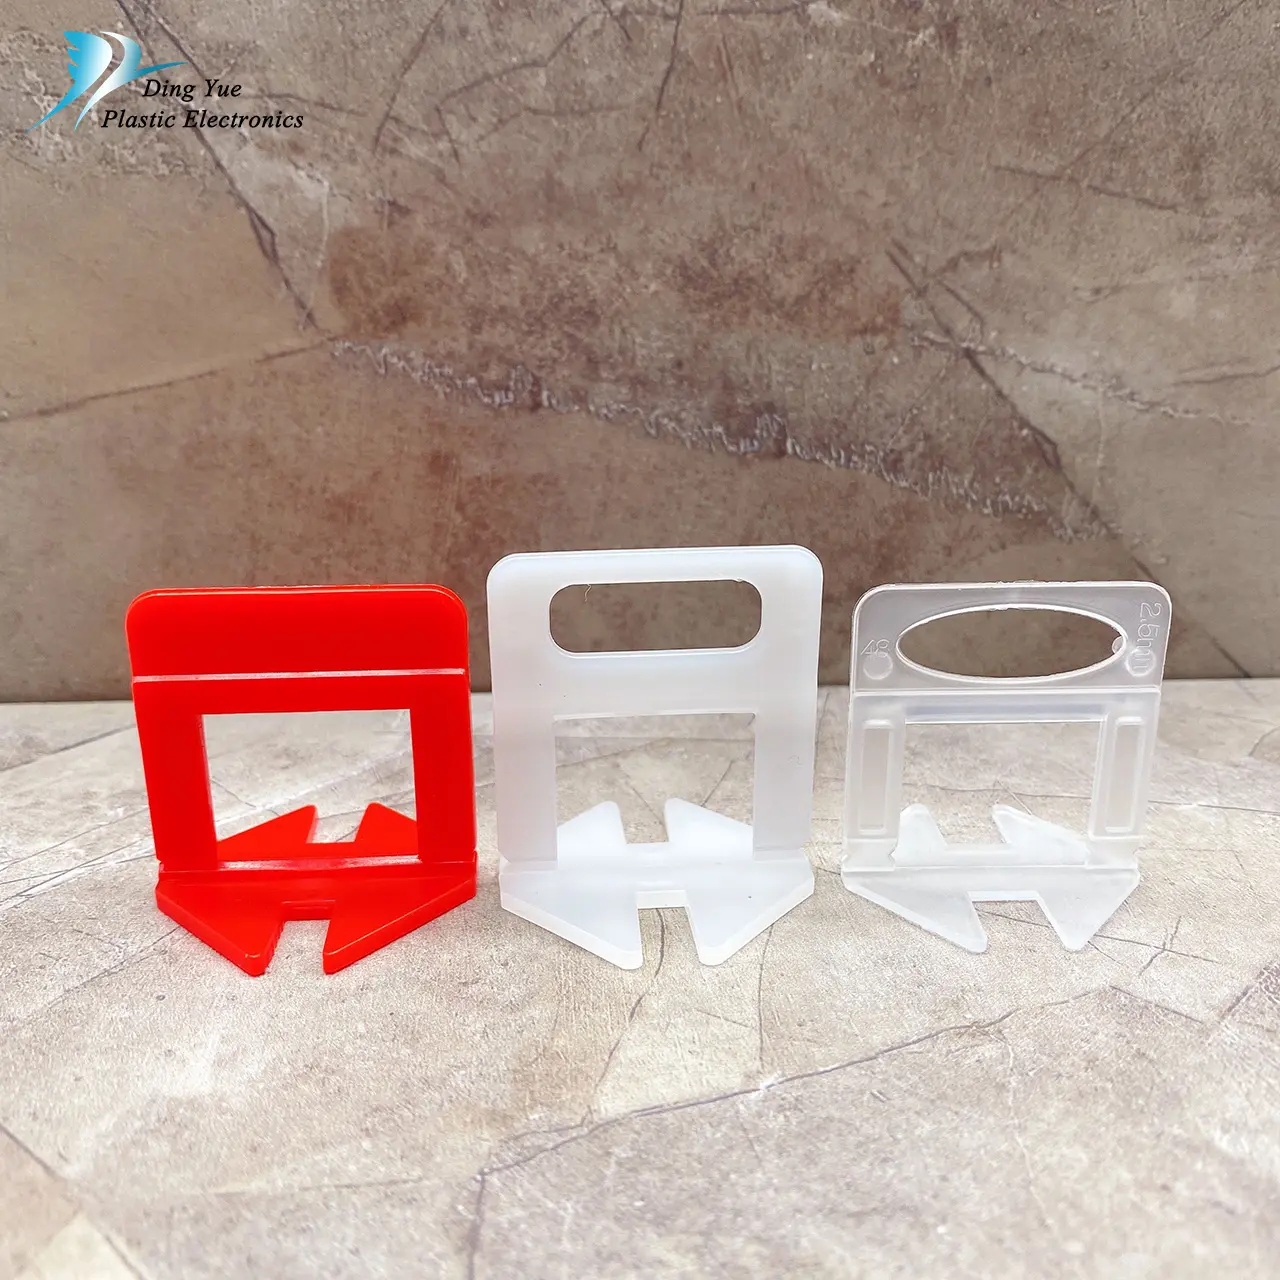 Ding Yue cheep tile leveler locator spacers adjuster tool max system on uneven floor hole positioner